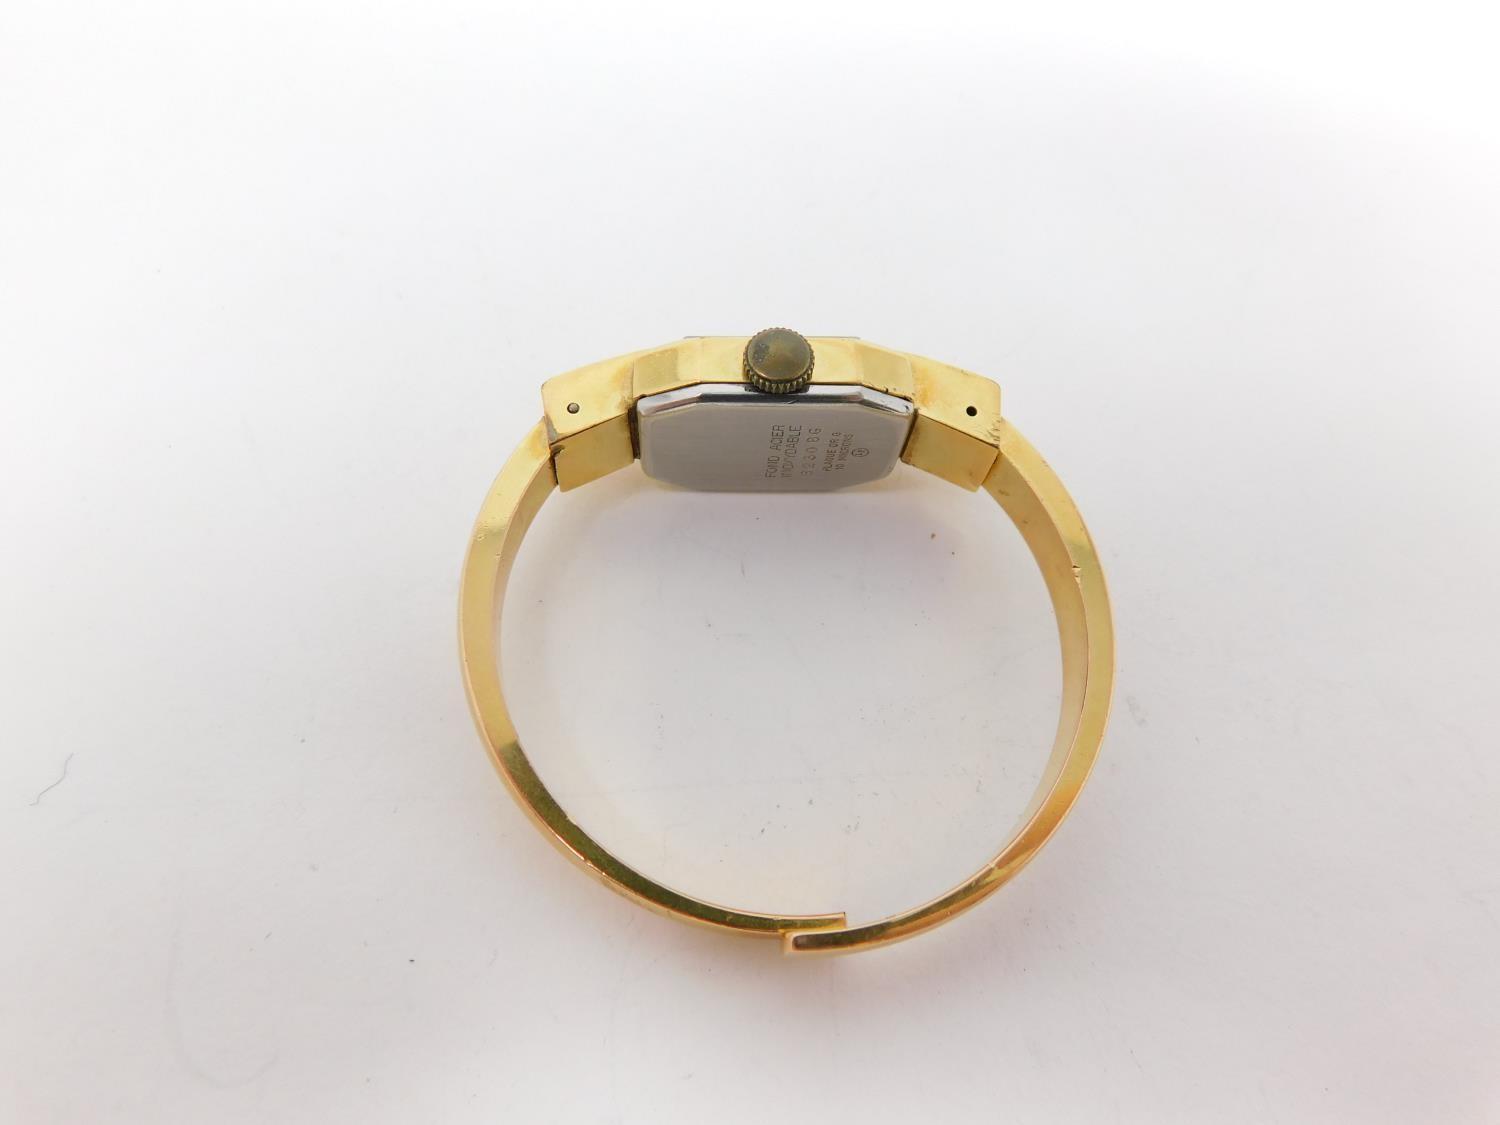 A gold plated vintage Arugo Swiss made ladies bangle watch. Diameter 4.8cm. - Image 6 of 7